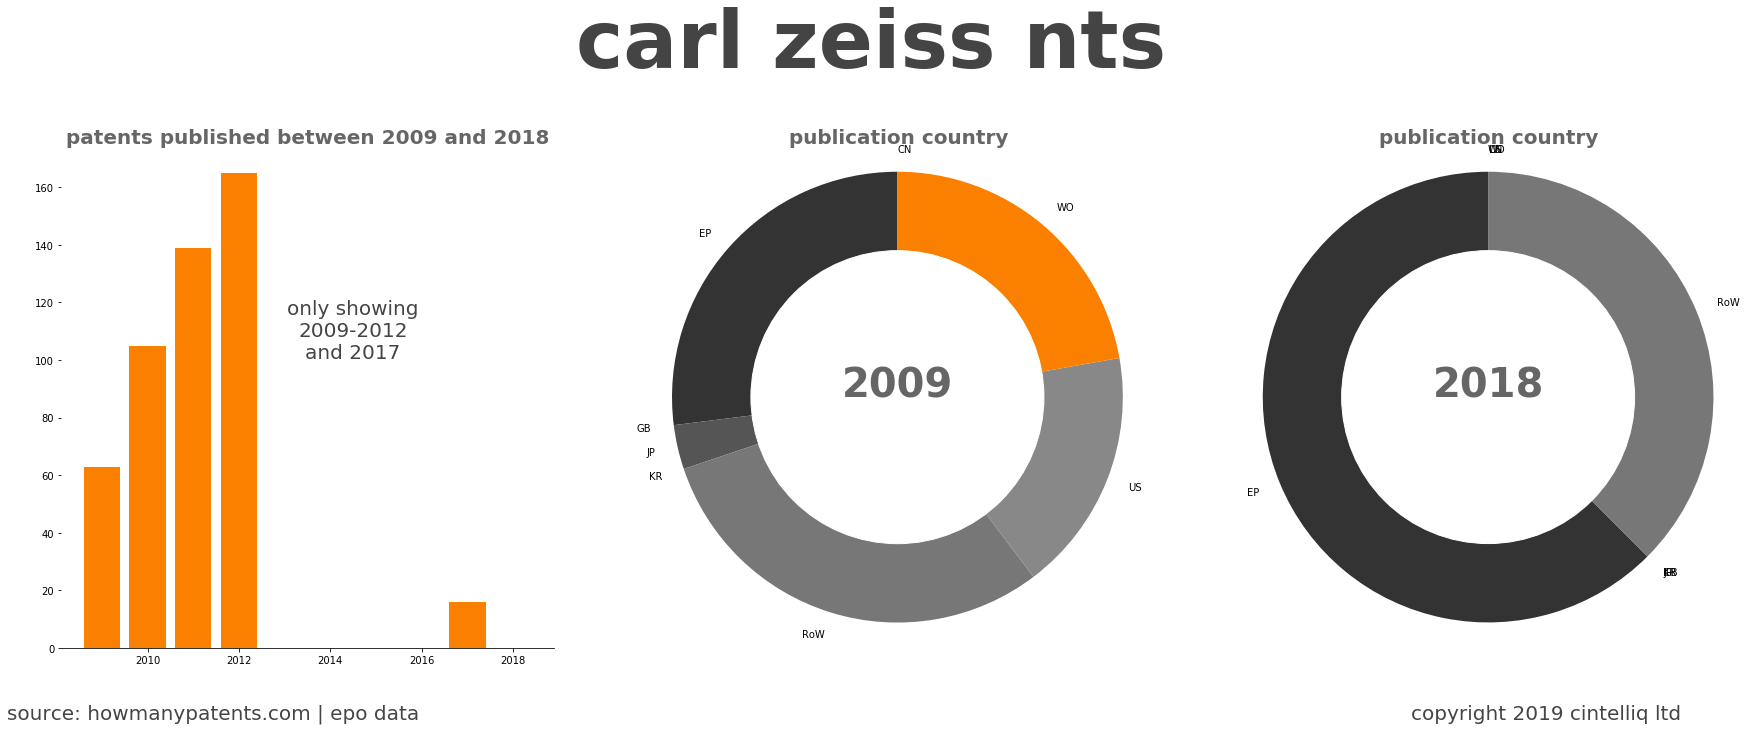 summary of patents for Carl Zeiss Nts